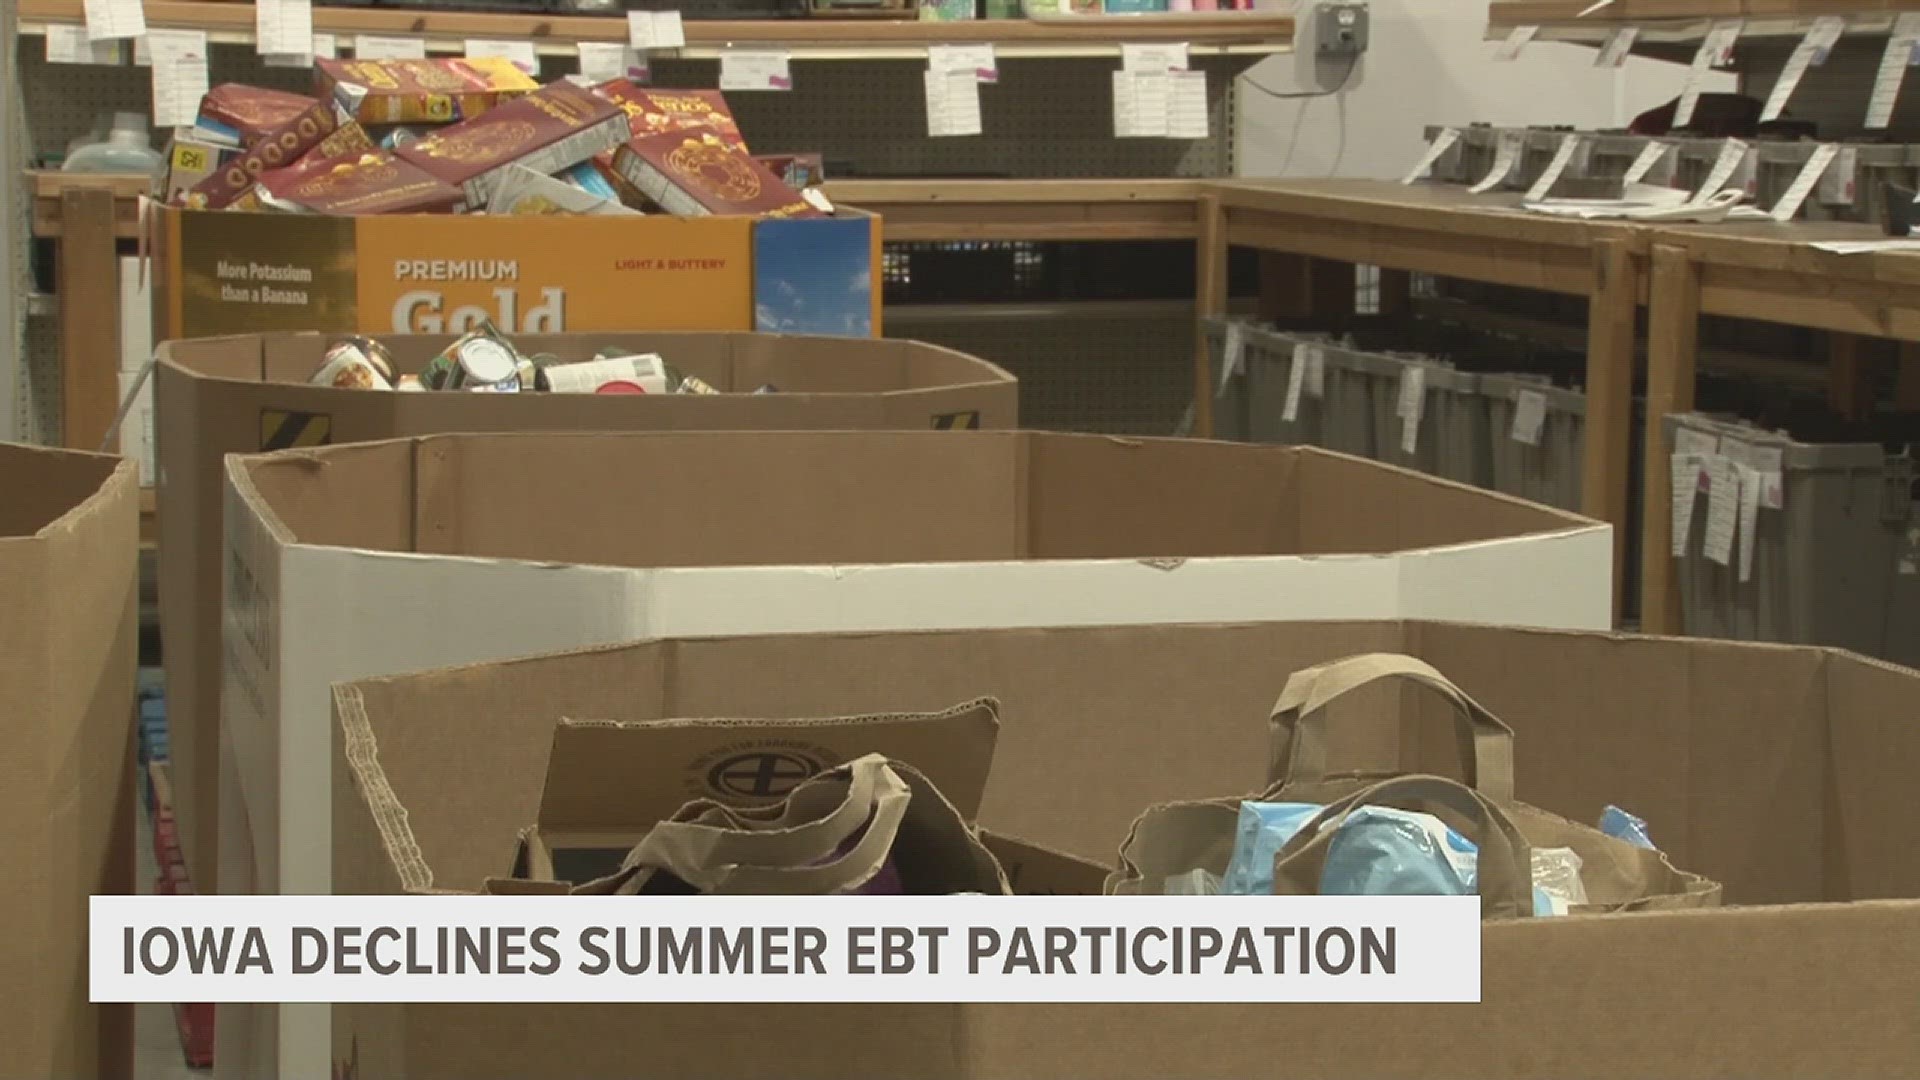 Iowa HHS and Gov. Kim Reynolds believe the program, which would provide money to families with kids to get food in the summer, lacks "a strong nutrition focus".